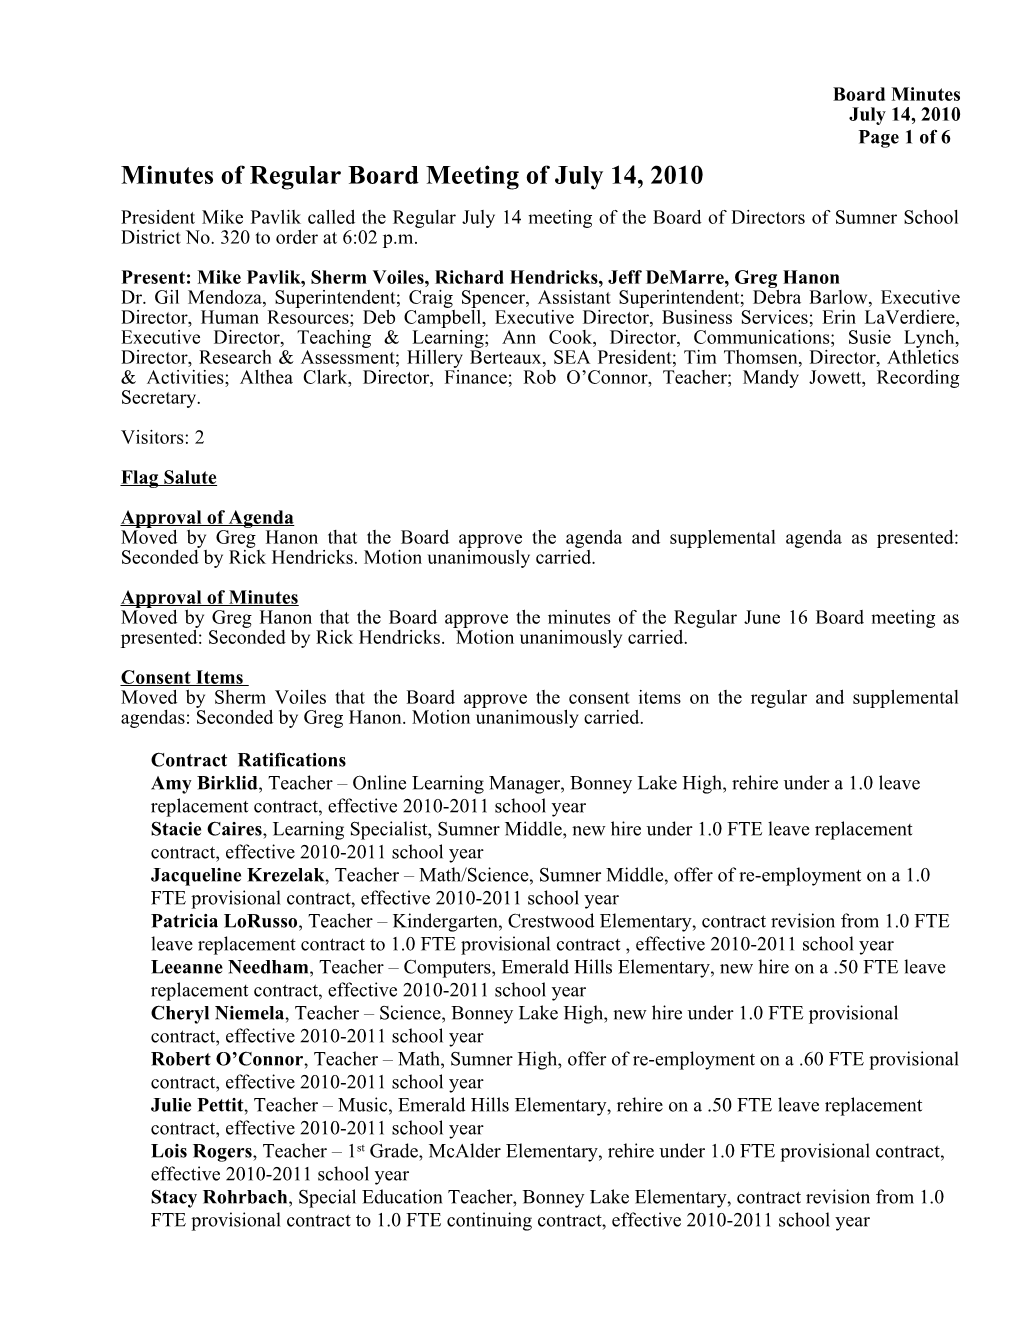 Minutes of Regular Board Meeting of July 14, 2010